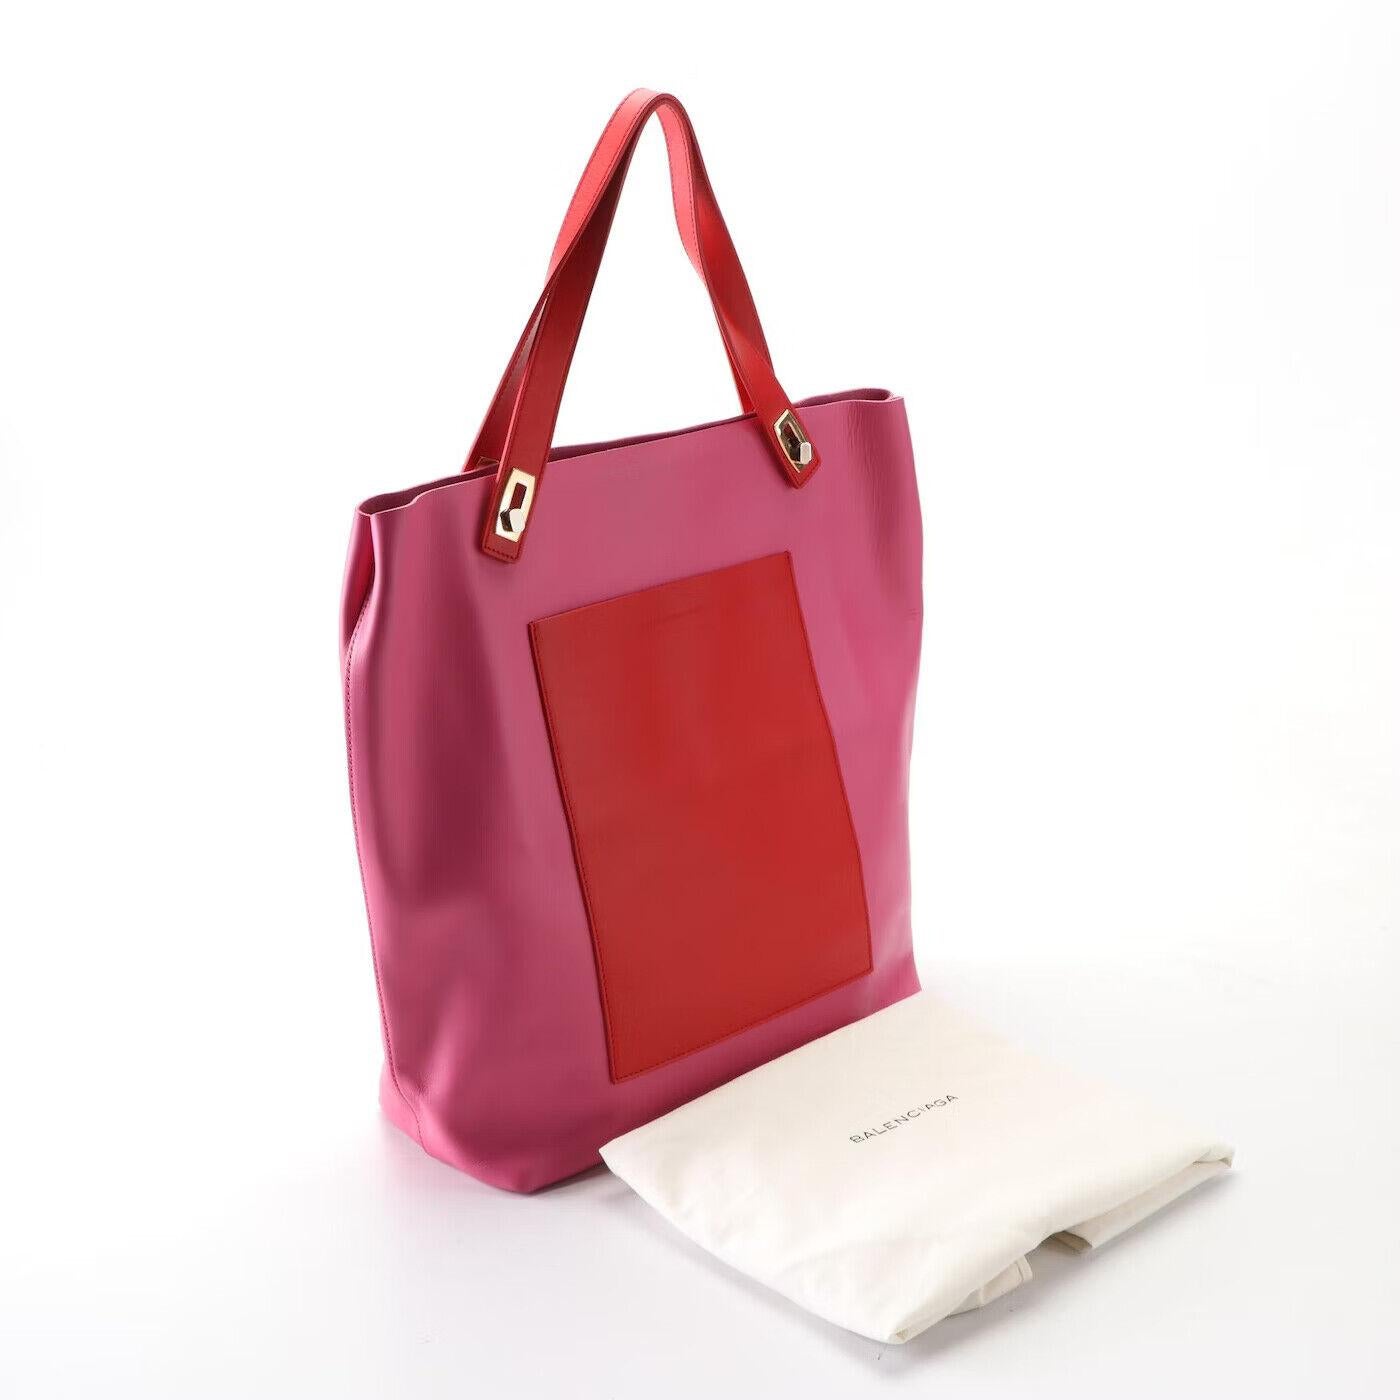 Stunning Balenciaga Tote
 Like New Store Display

Calfskin Leather
Pink & Red

2013 Spring/Summer collection
2013 Date Code

12.0